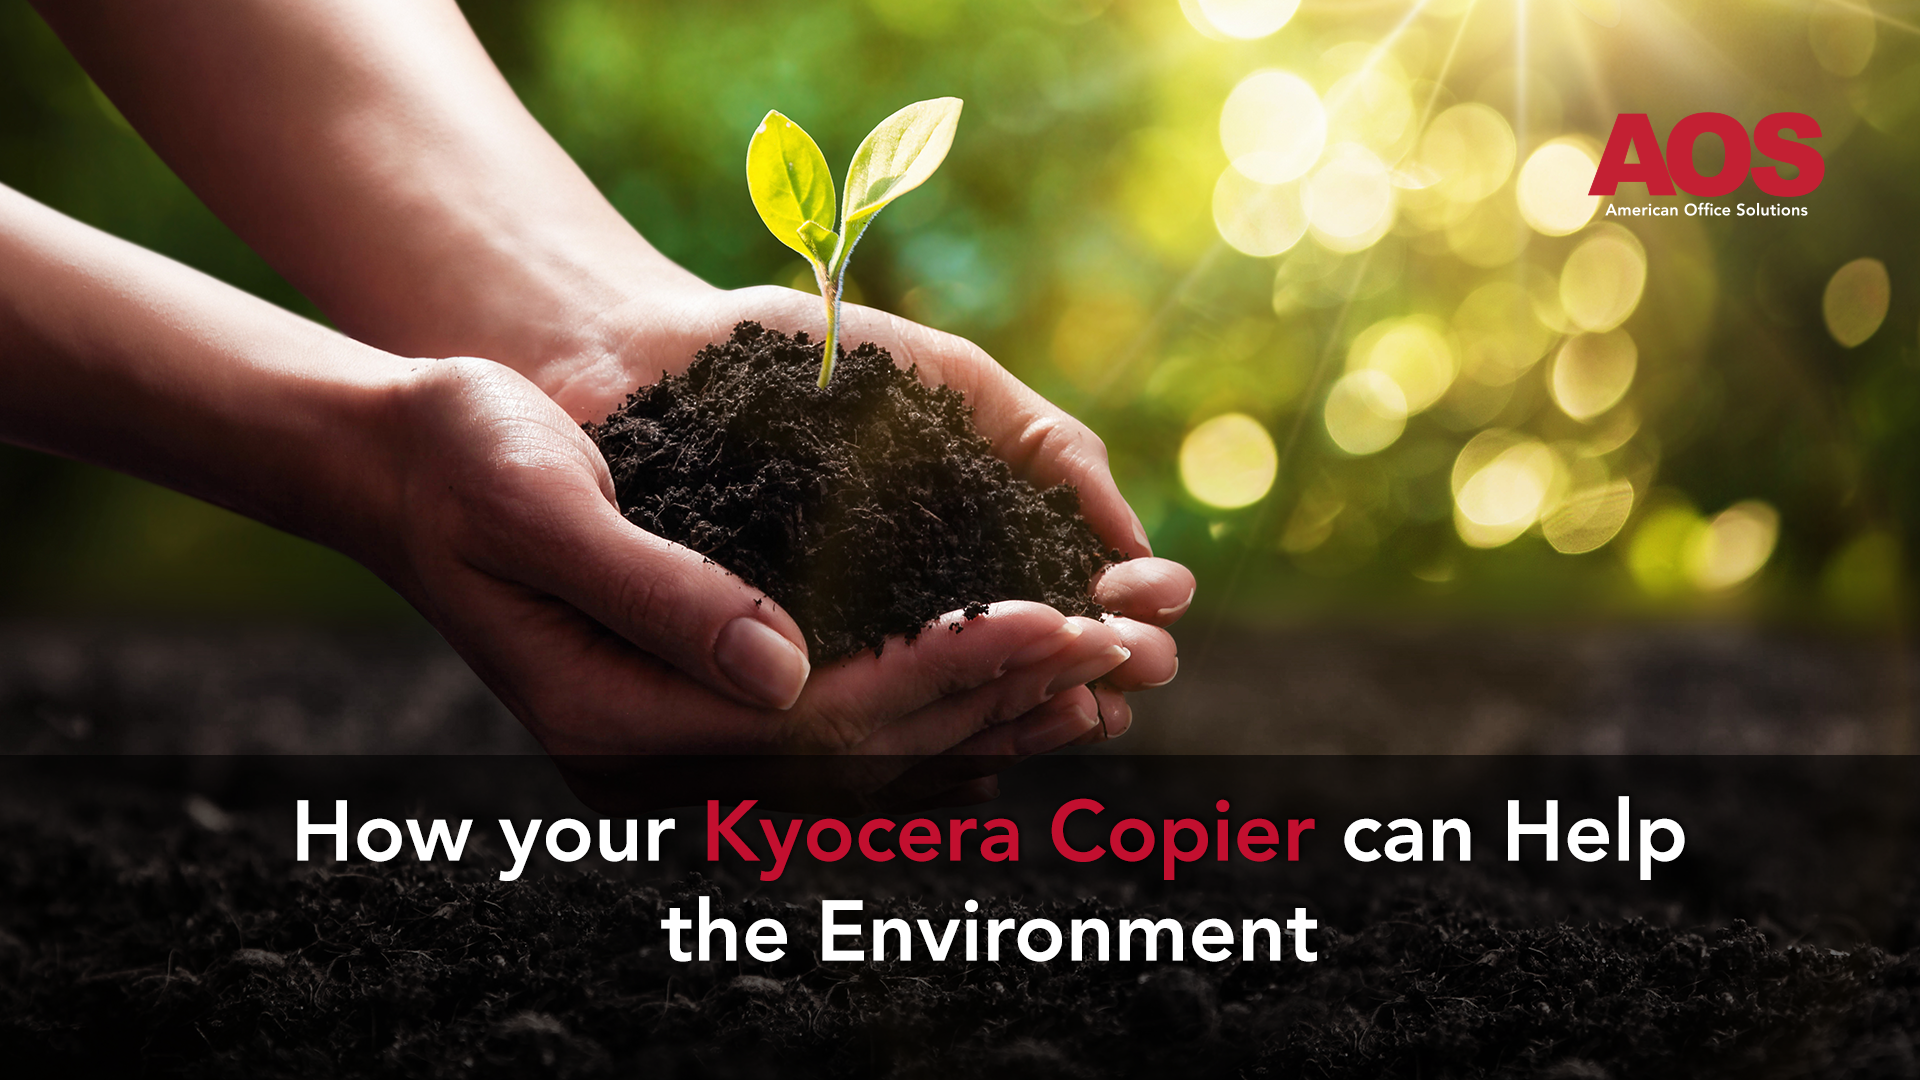 Kyocera Copier and the Environment